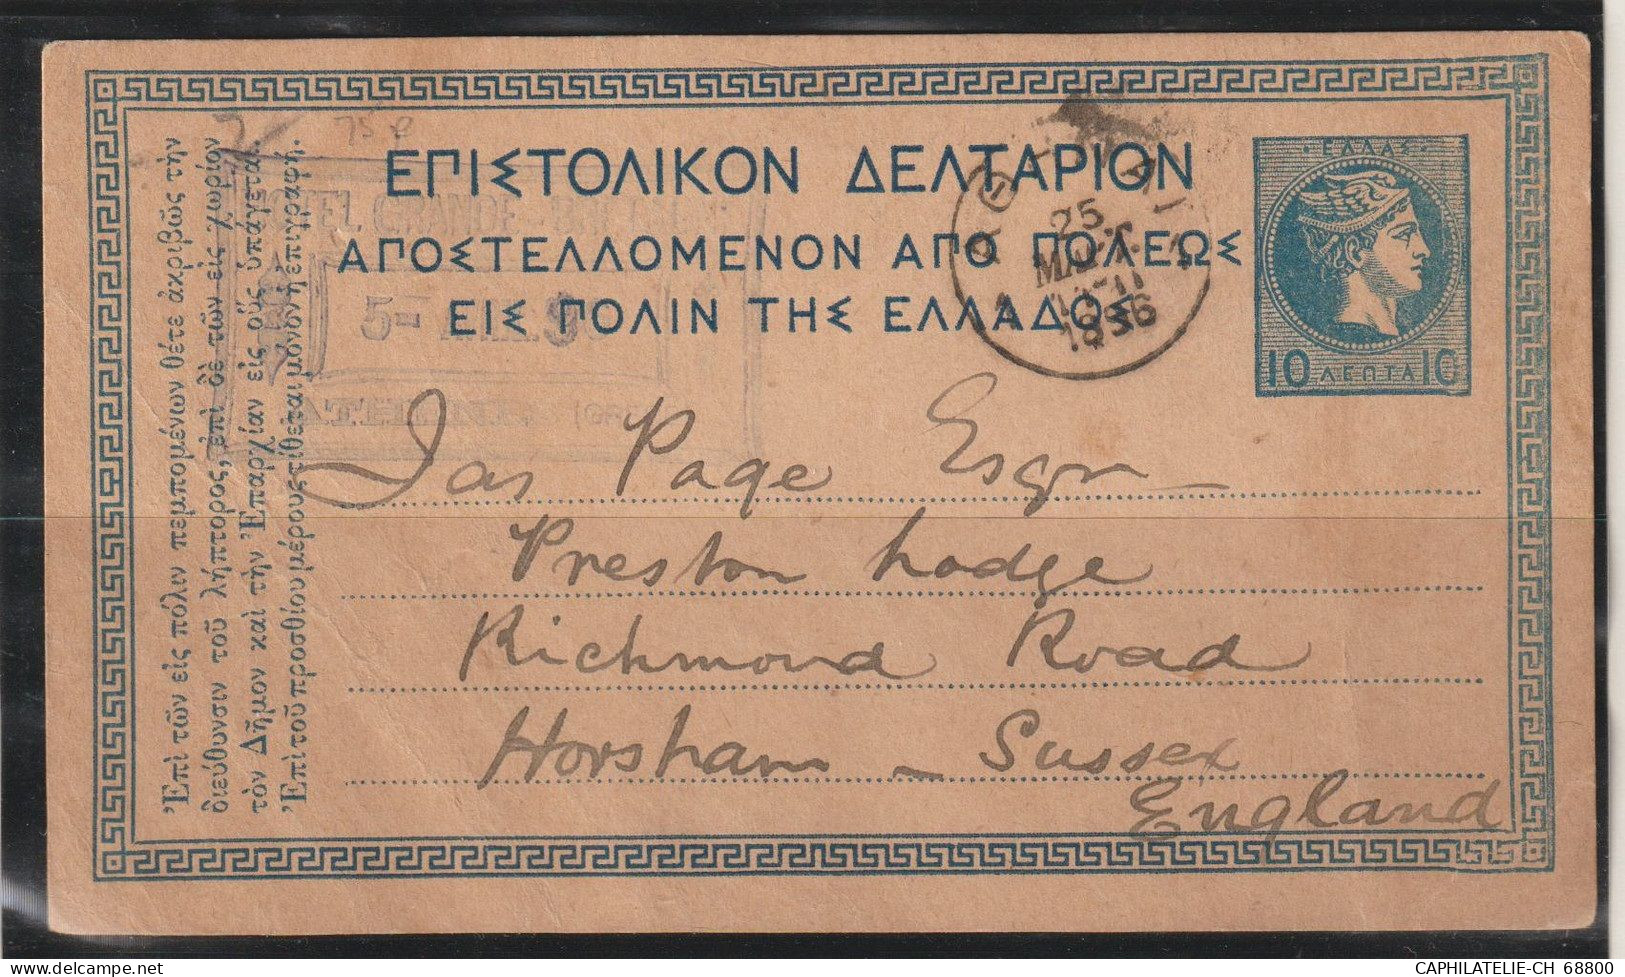 Greece Exhibition Sheet: Postal Stationary From 1986 Posted The Opening Day Of The 1896 Olympic Games In Athens - Ete 1896: Athènes